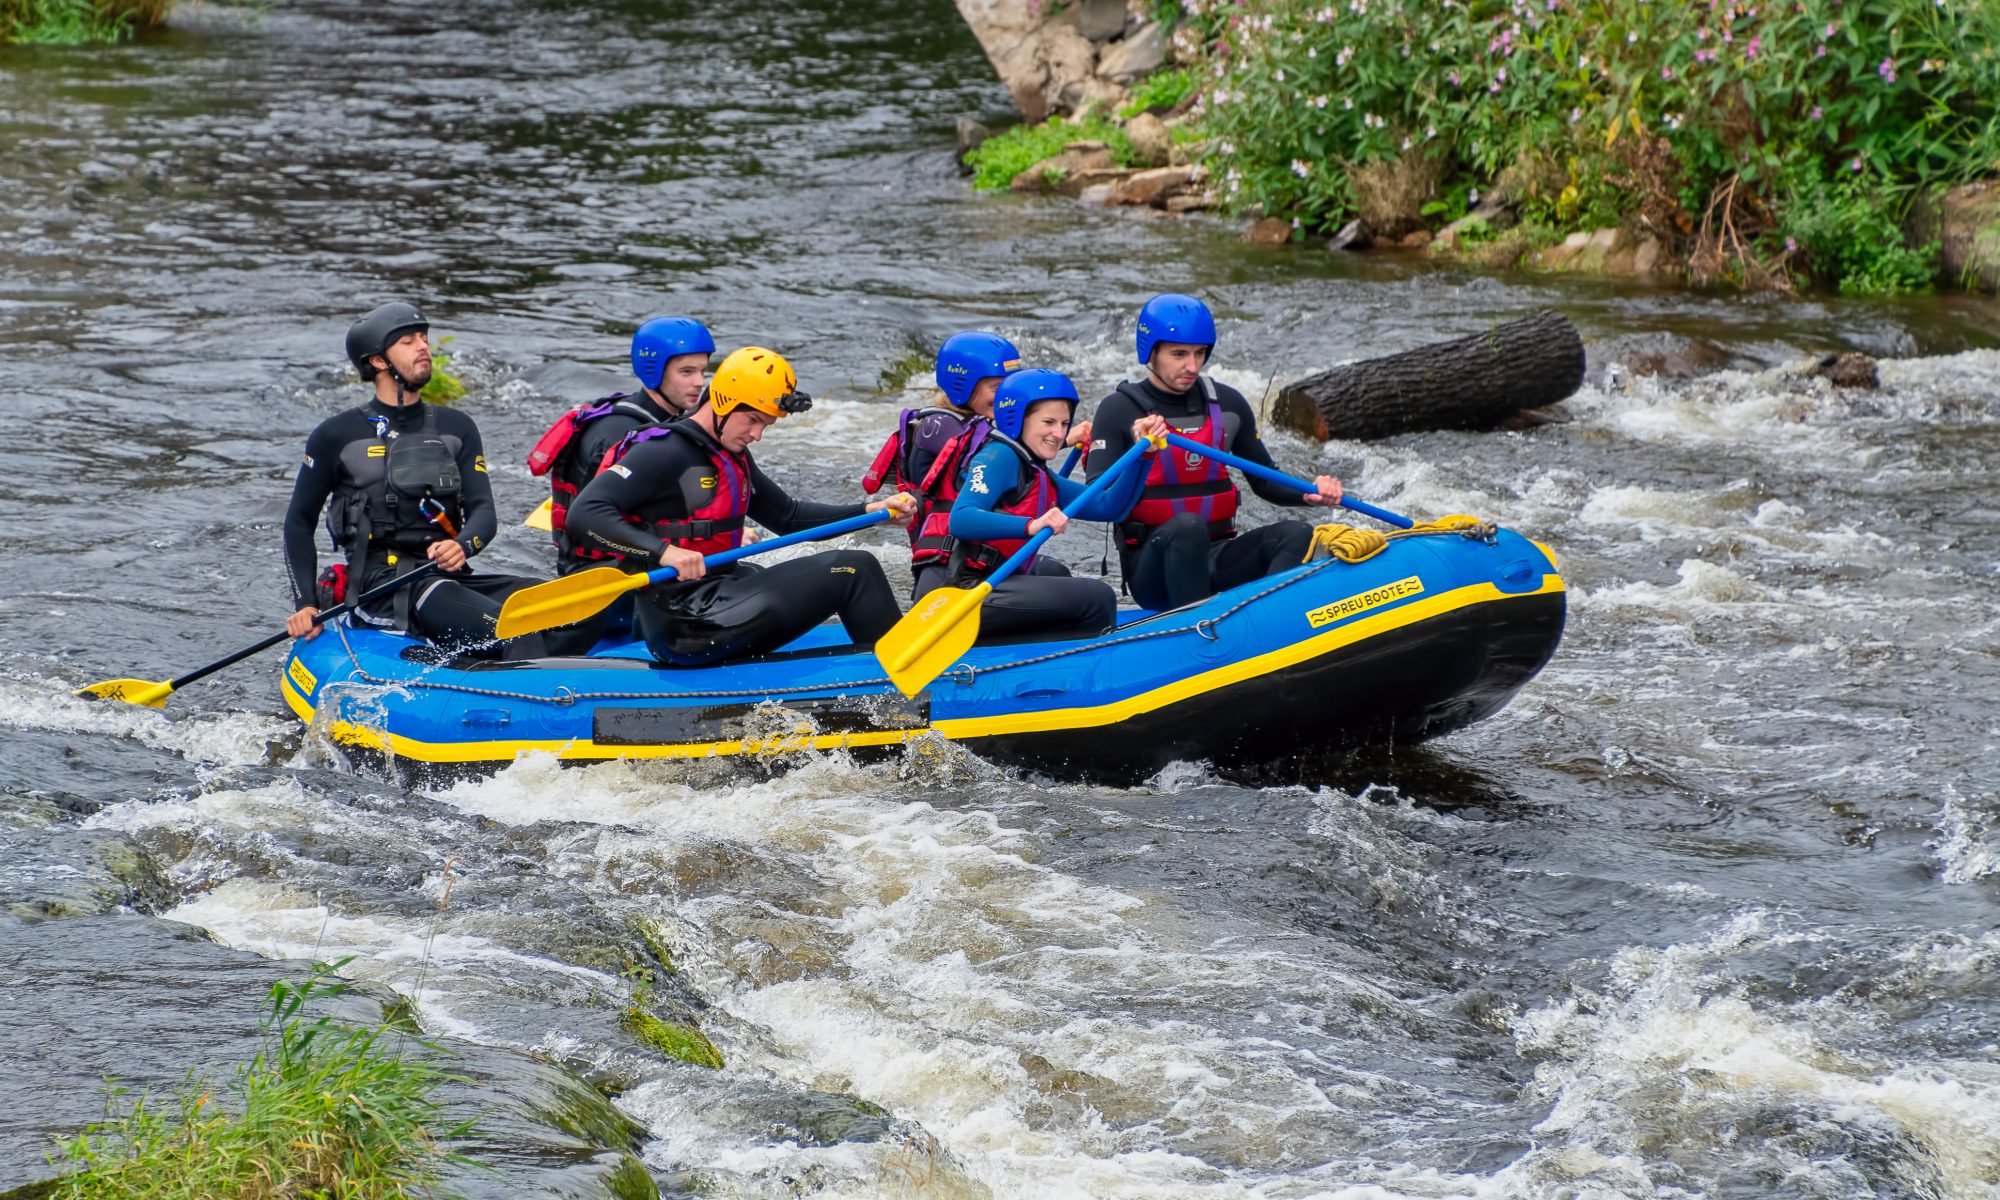 A group of people rafting along the River Dee in Wales.